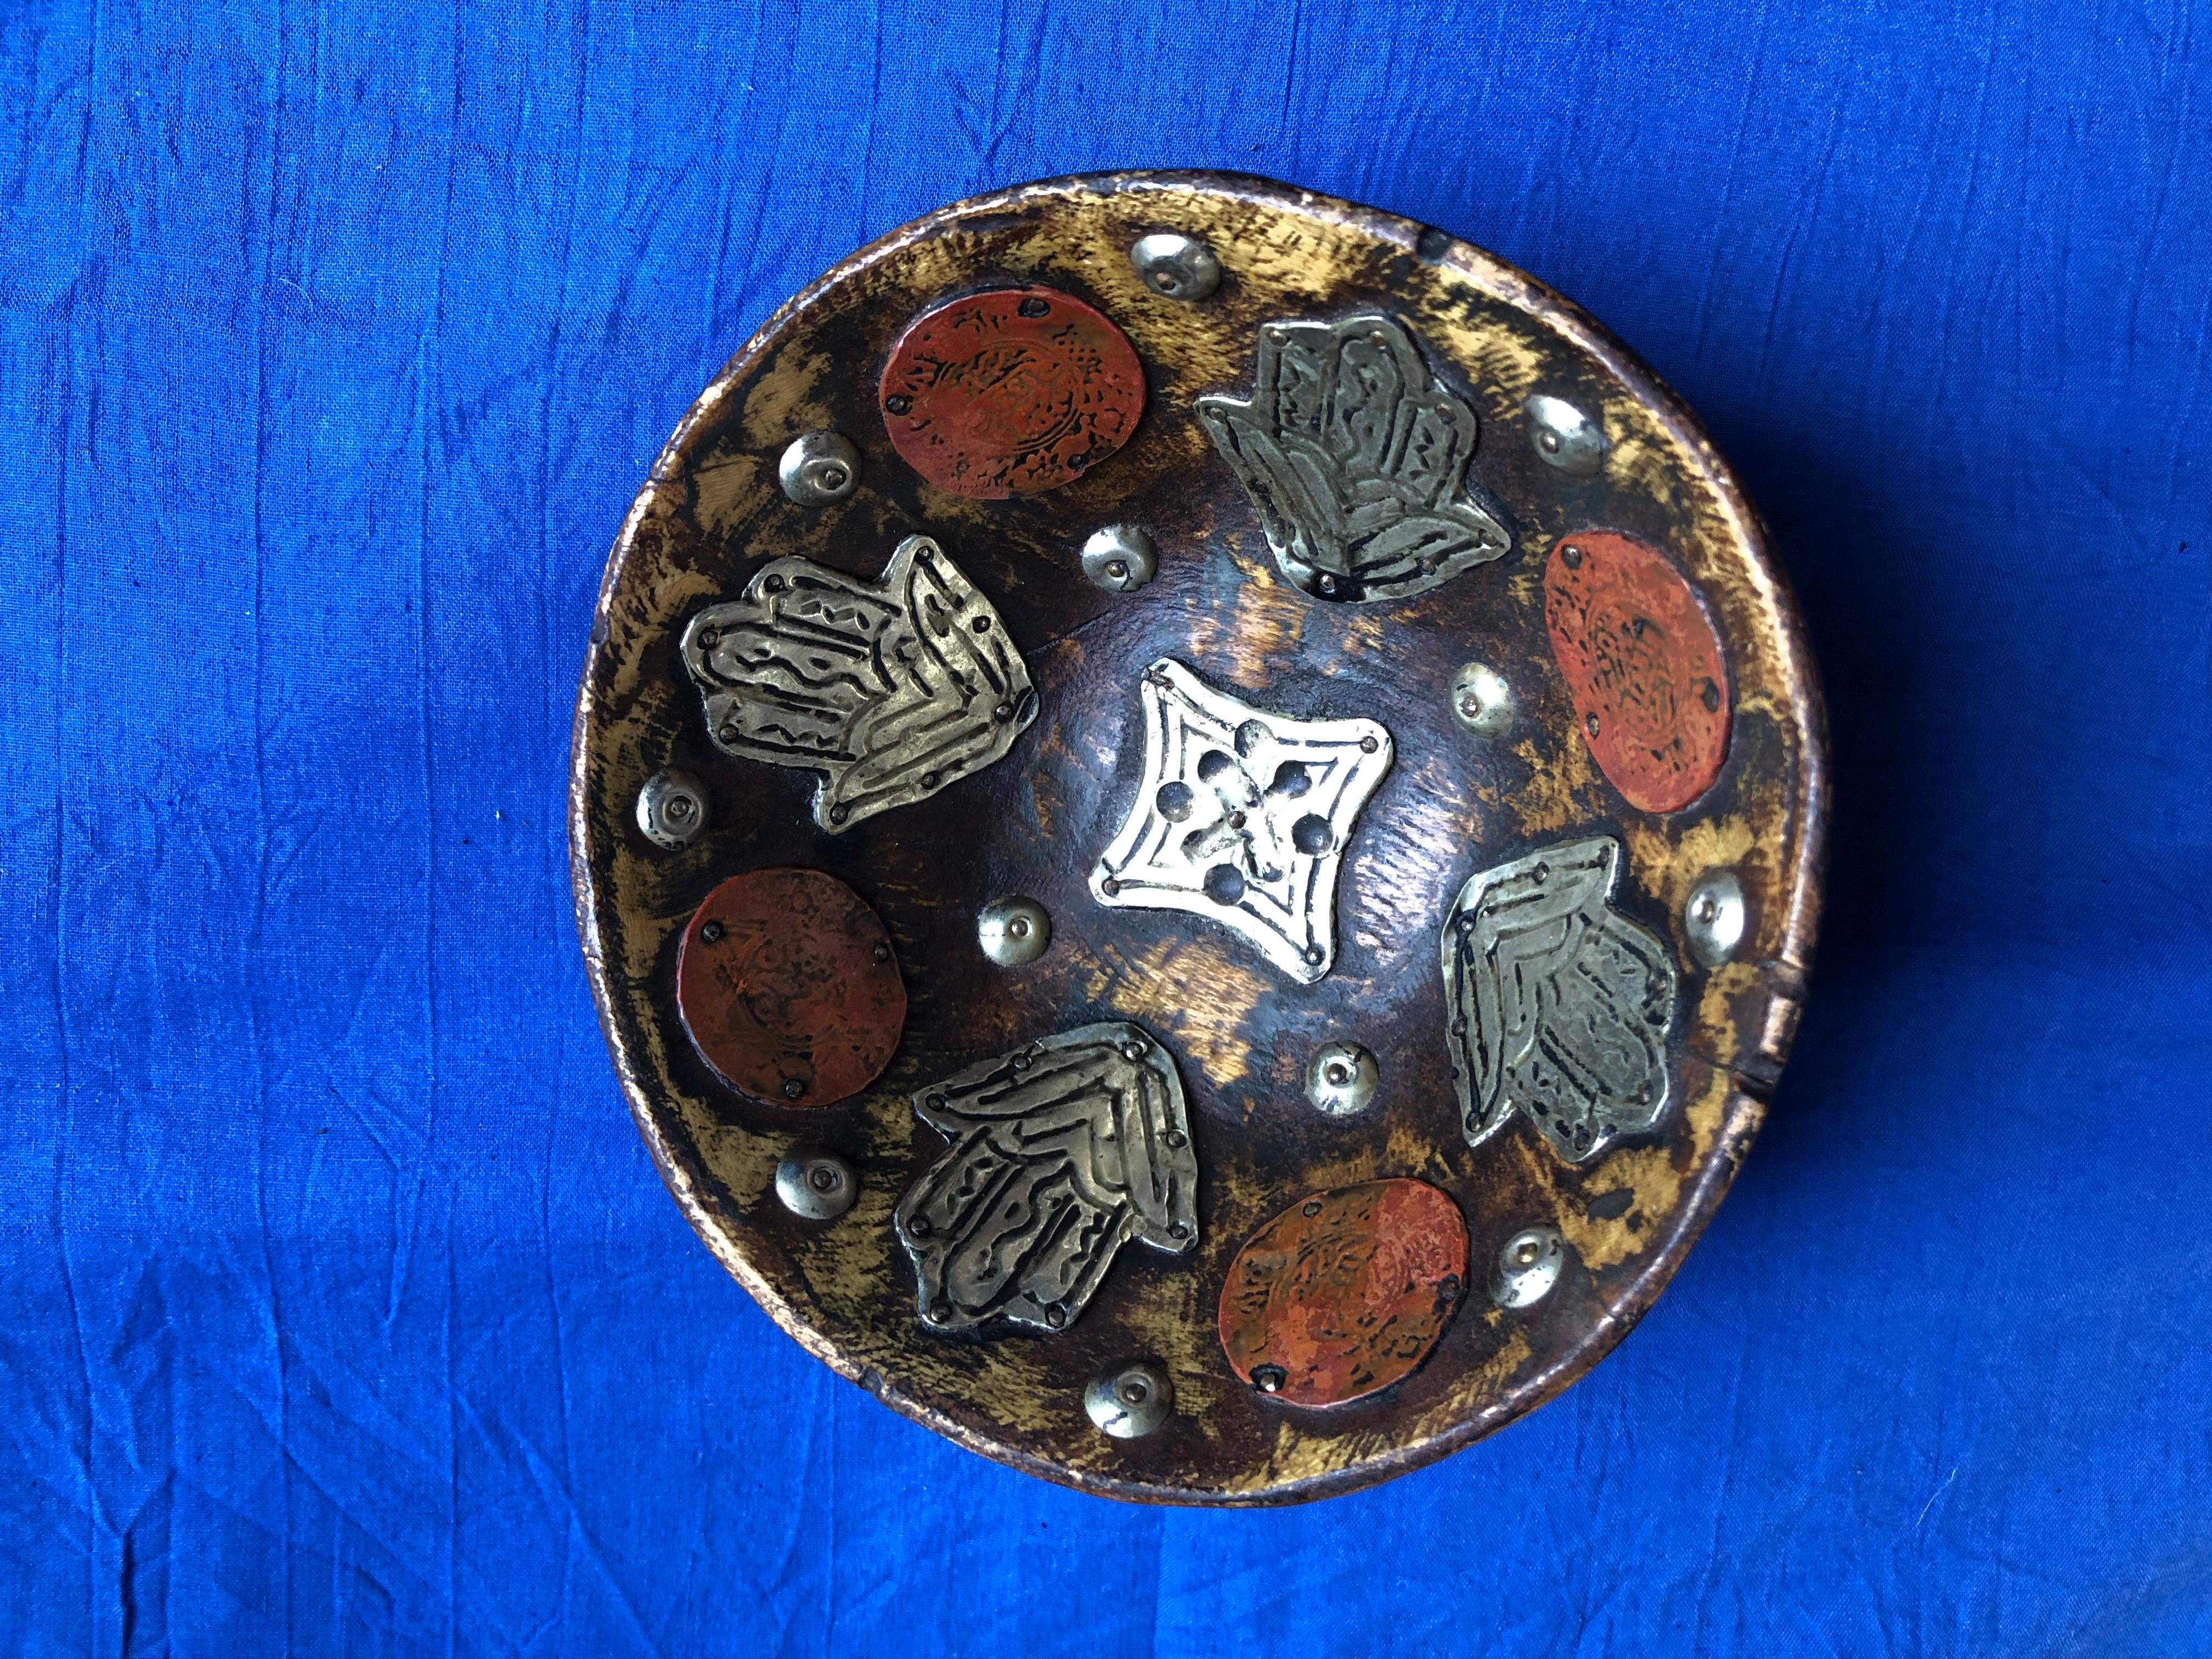 Crafted from a single piece of thick hardwood, this hand-carved bowl is decorated with antique silver Rial coins dating back to 1913. The coins have been hammered and are stained with henna, giving them a ruddy glow. Hand-forged chased Hamsa (Hand